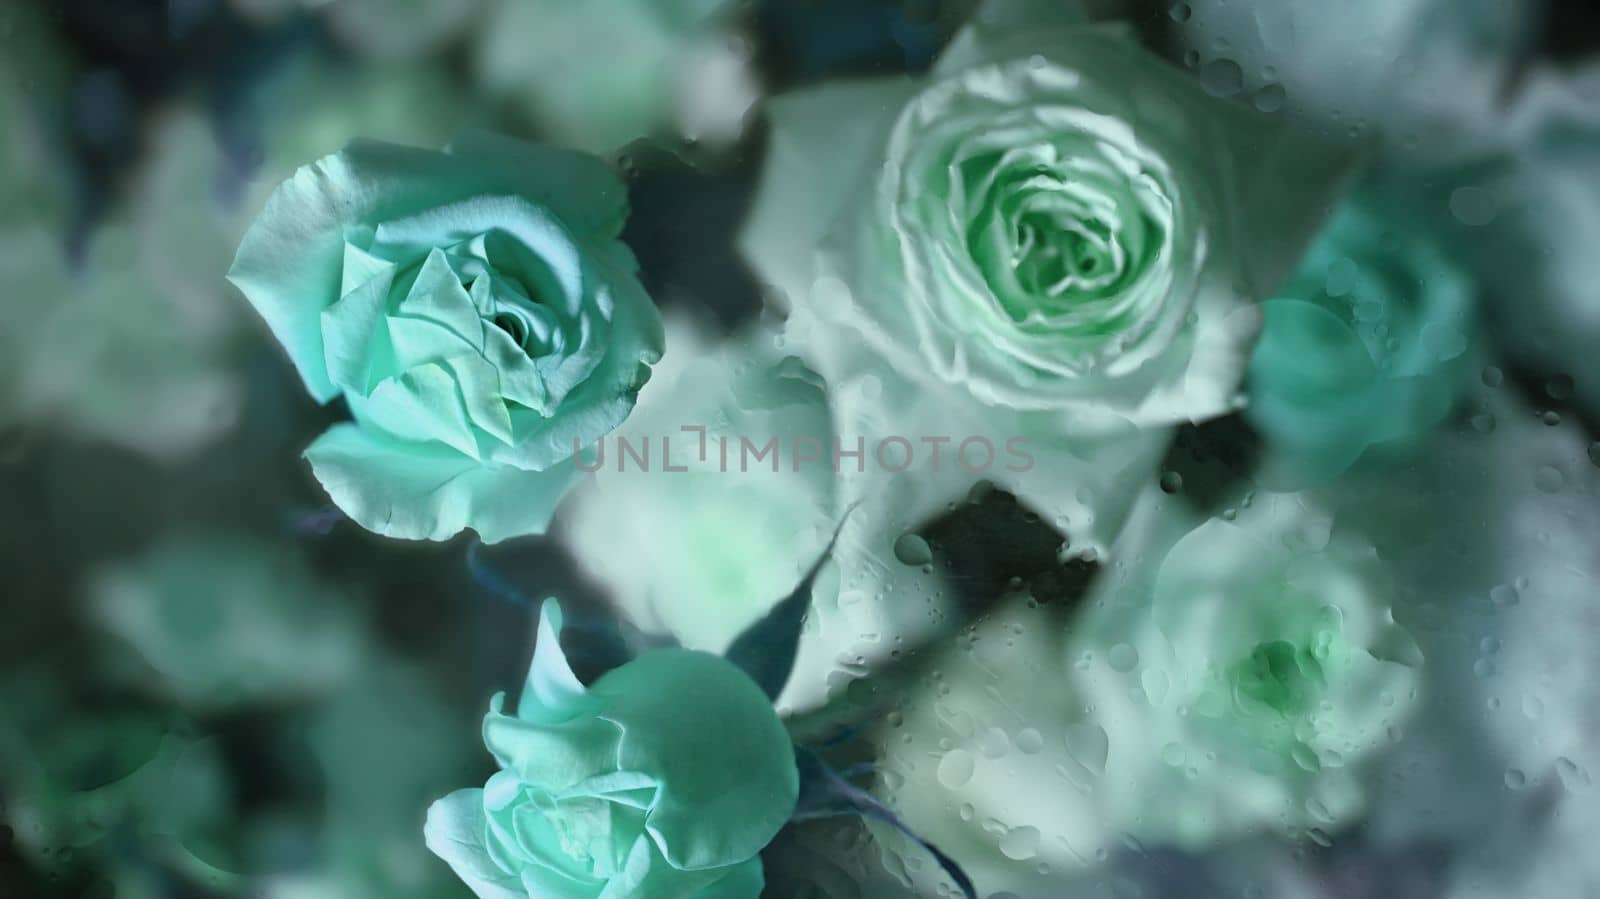 Cold foggy glass with bouquet of beautiful blue roses inside with dripping water drops, for floral botanical wallpaper.